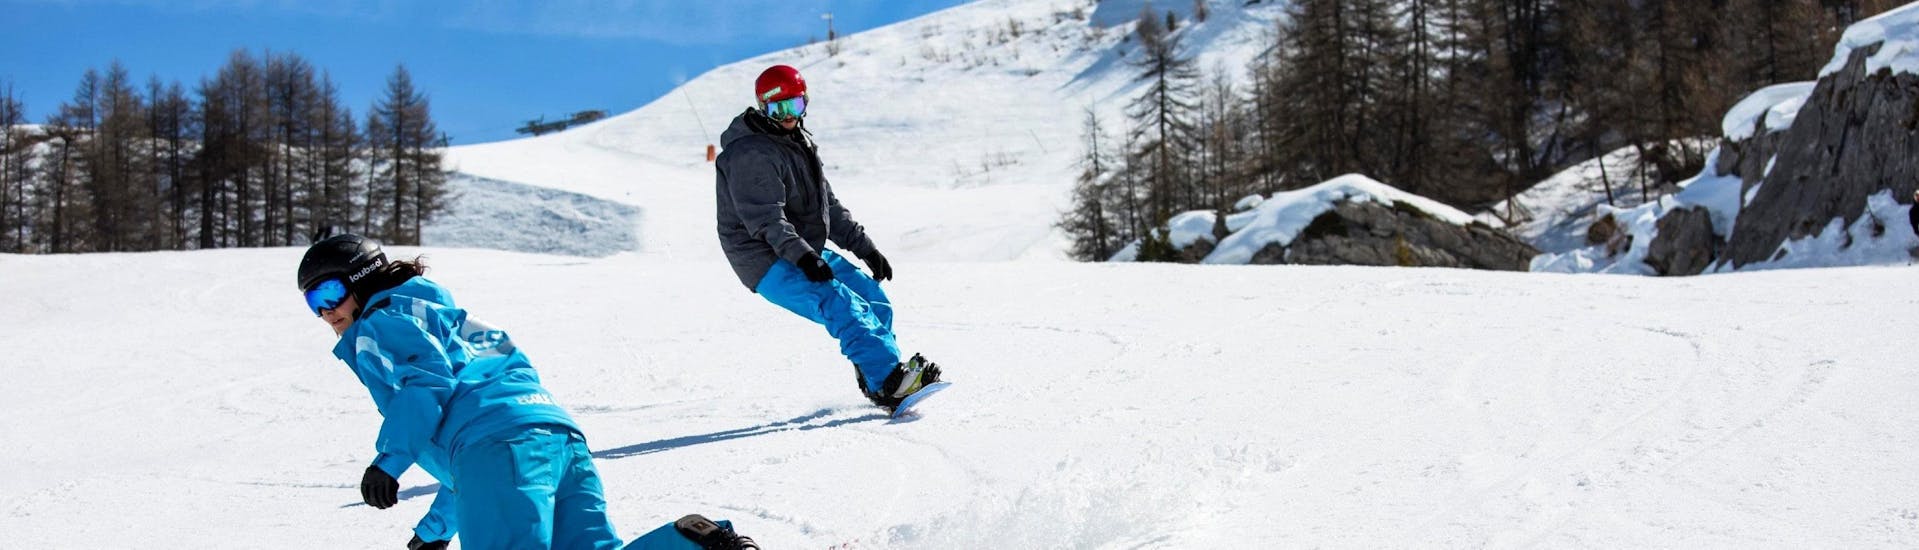 private-snowboarding-lessons-from-8-years-low-season-esi-pra-loup-hero